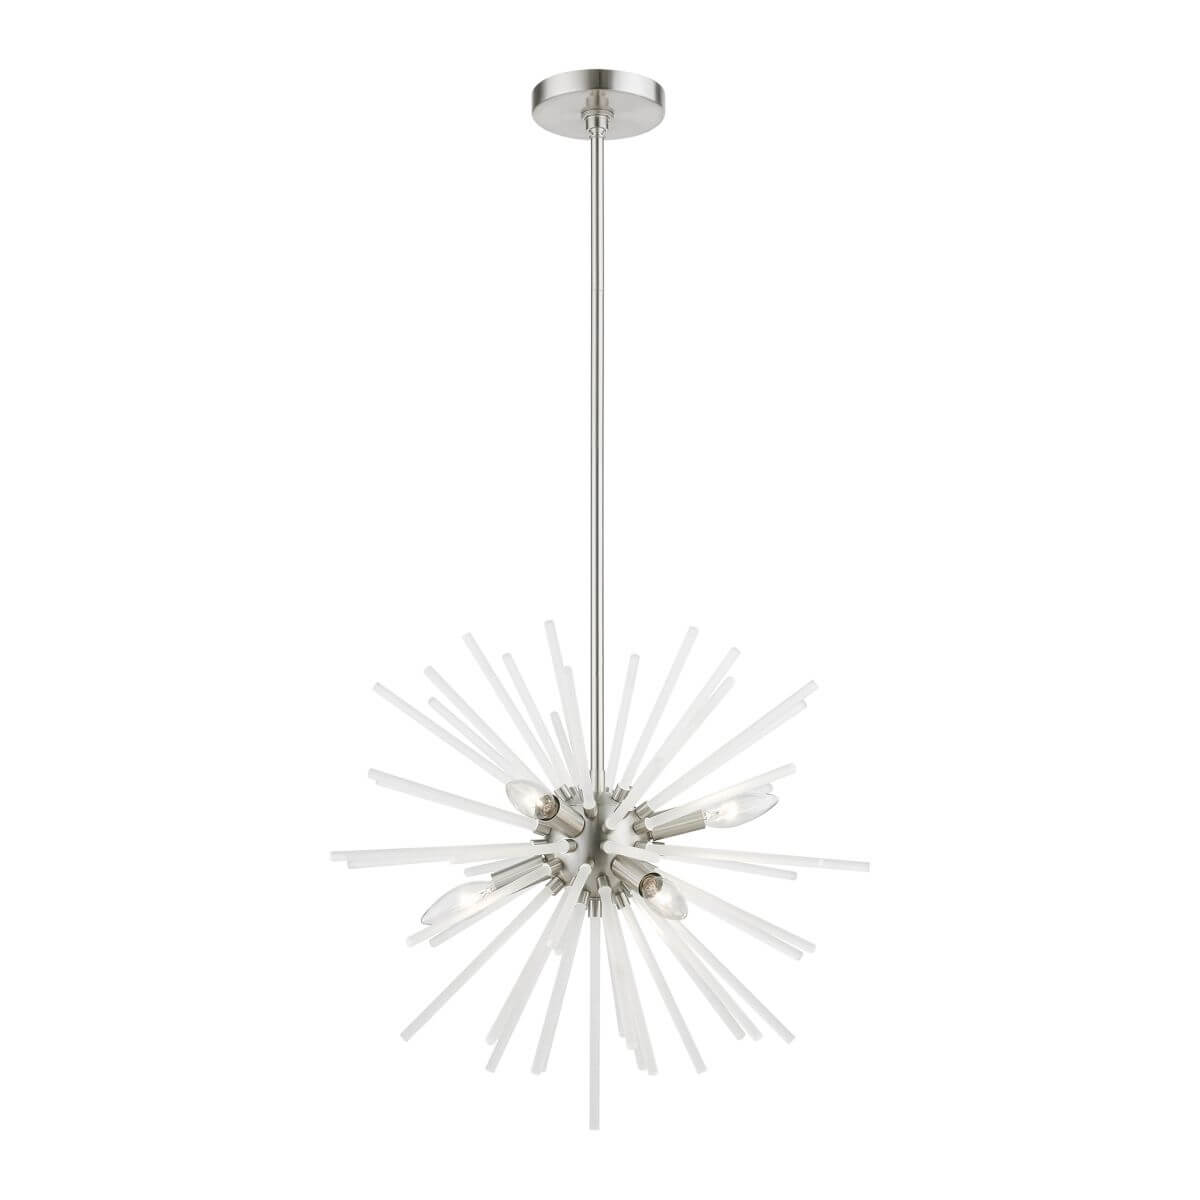 Livex 48824-91 Uptown 6 Light 20 inch Chandelier in Brushed Nickel with Acid Etched Rods